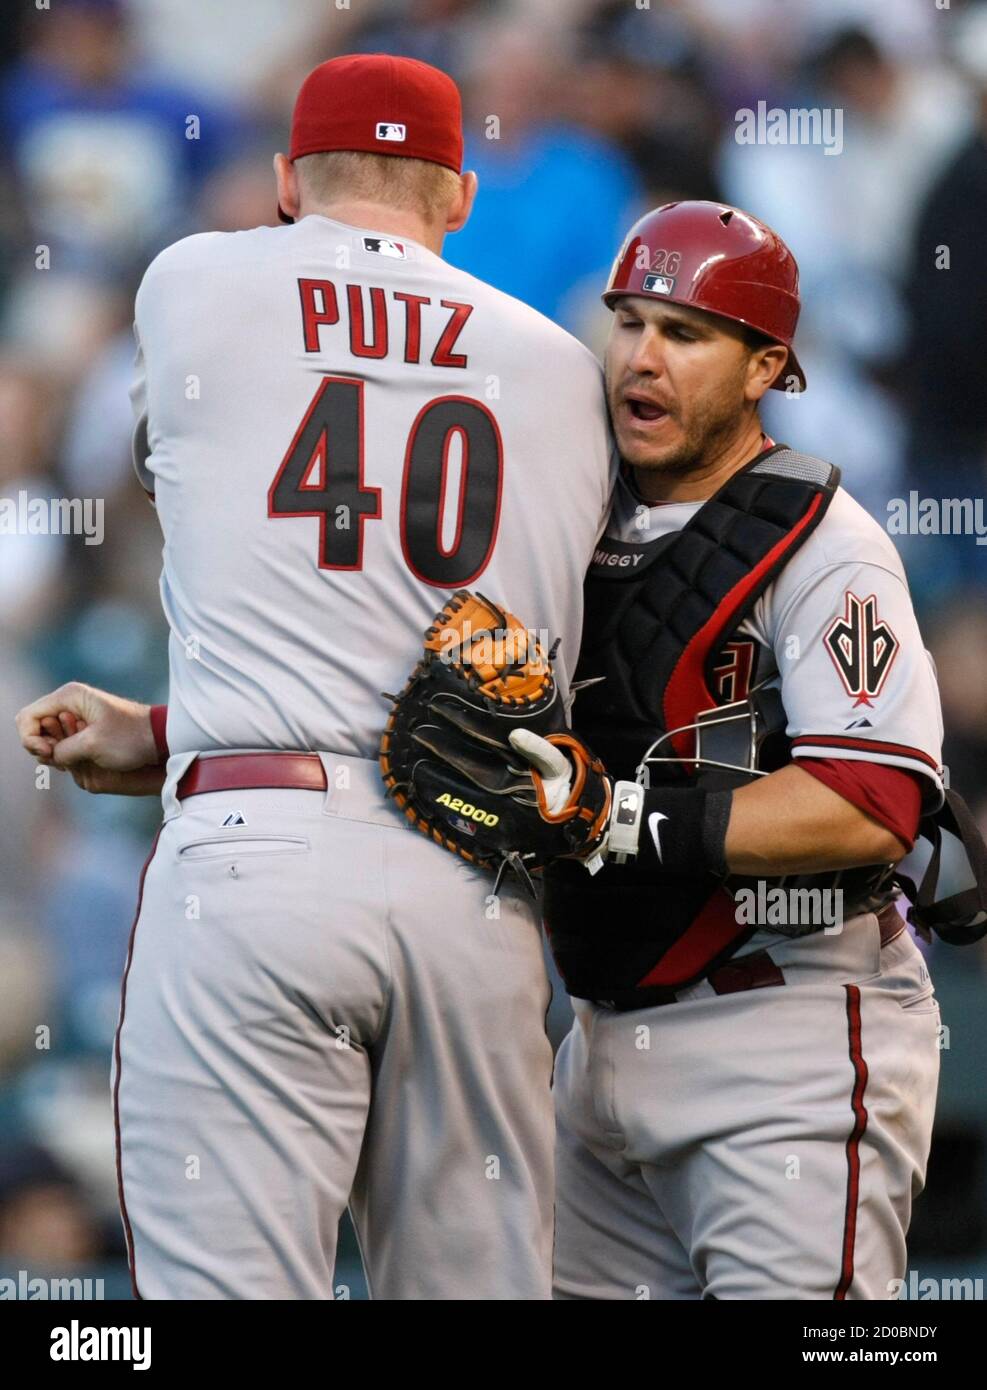 Arizona Diamondbacks closing pitcher J.J. Putz (40) celebrates with Diamondbacks catcher Miguel Montero after they defeated the Colorado Rockies in their MLB National League baseball opening day game in Denver April 1, 2011. REUTERS/Rick Wilking (UNITED STATES - Tags: SPORT BASEBALL) Stock Photo